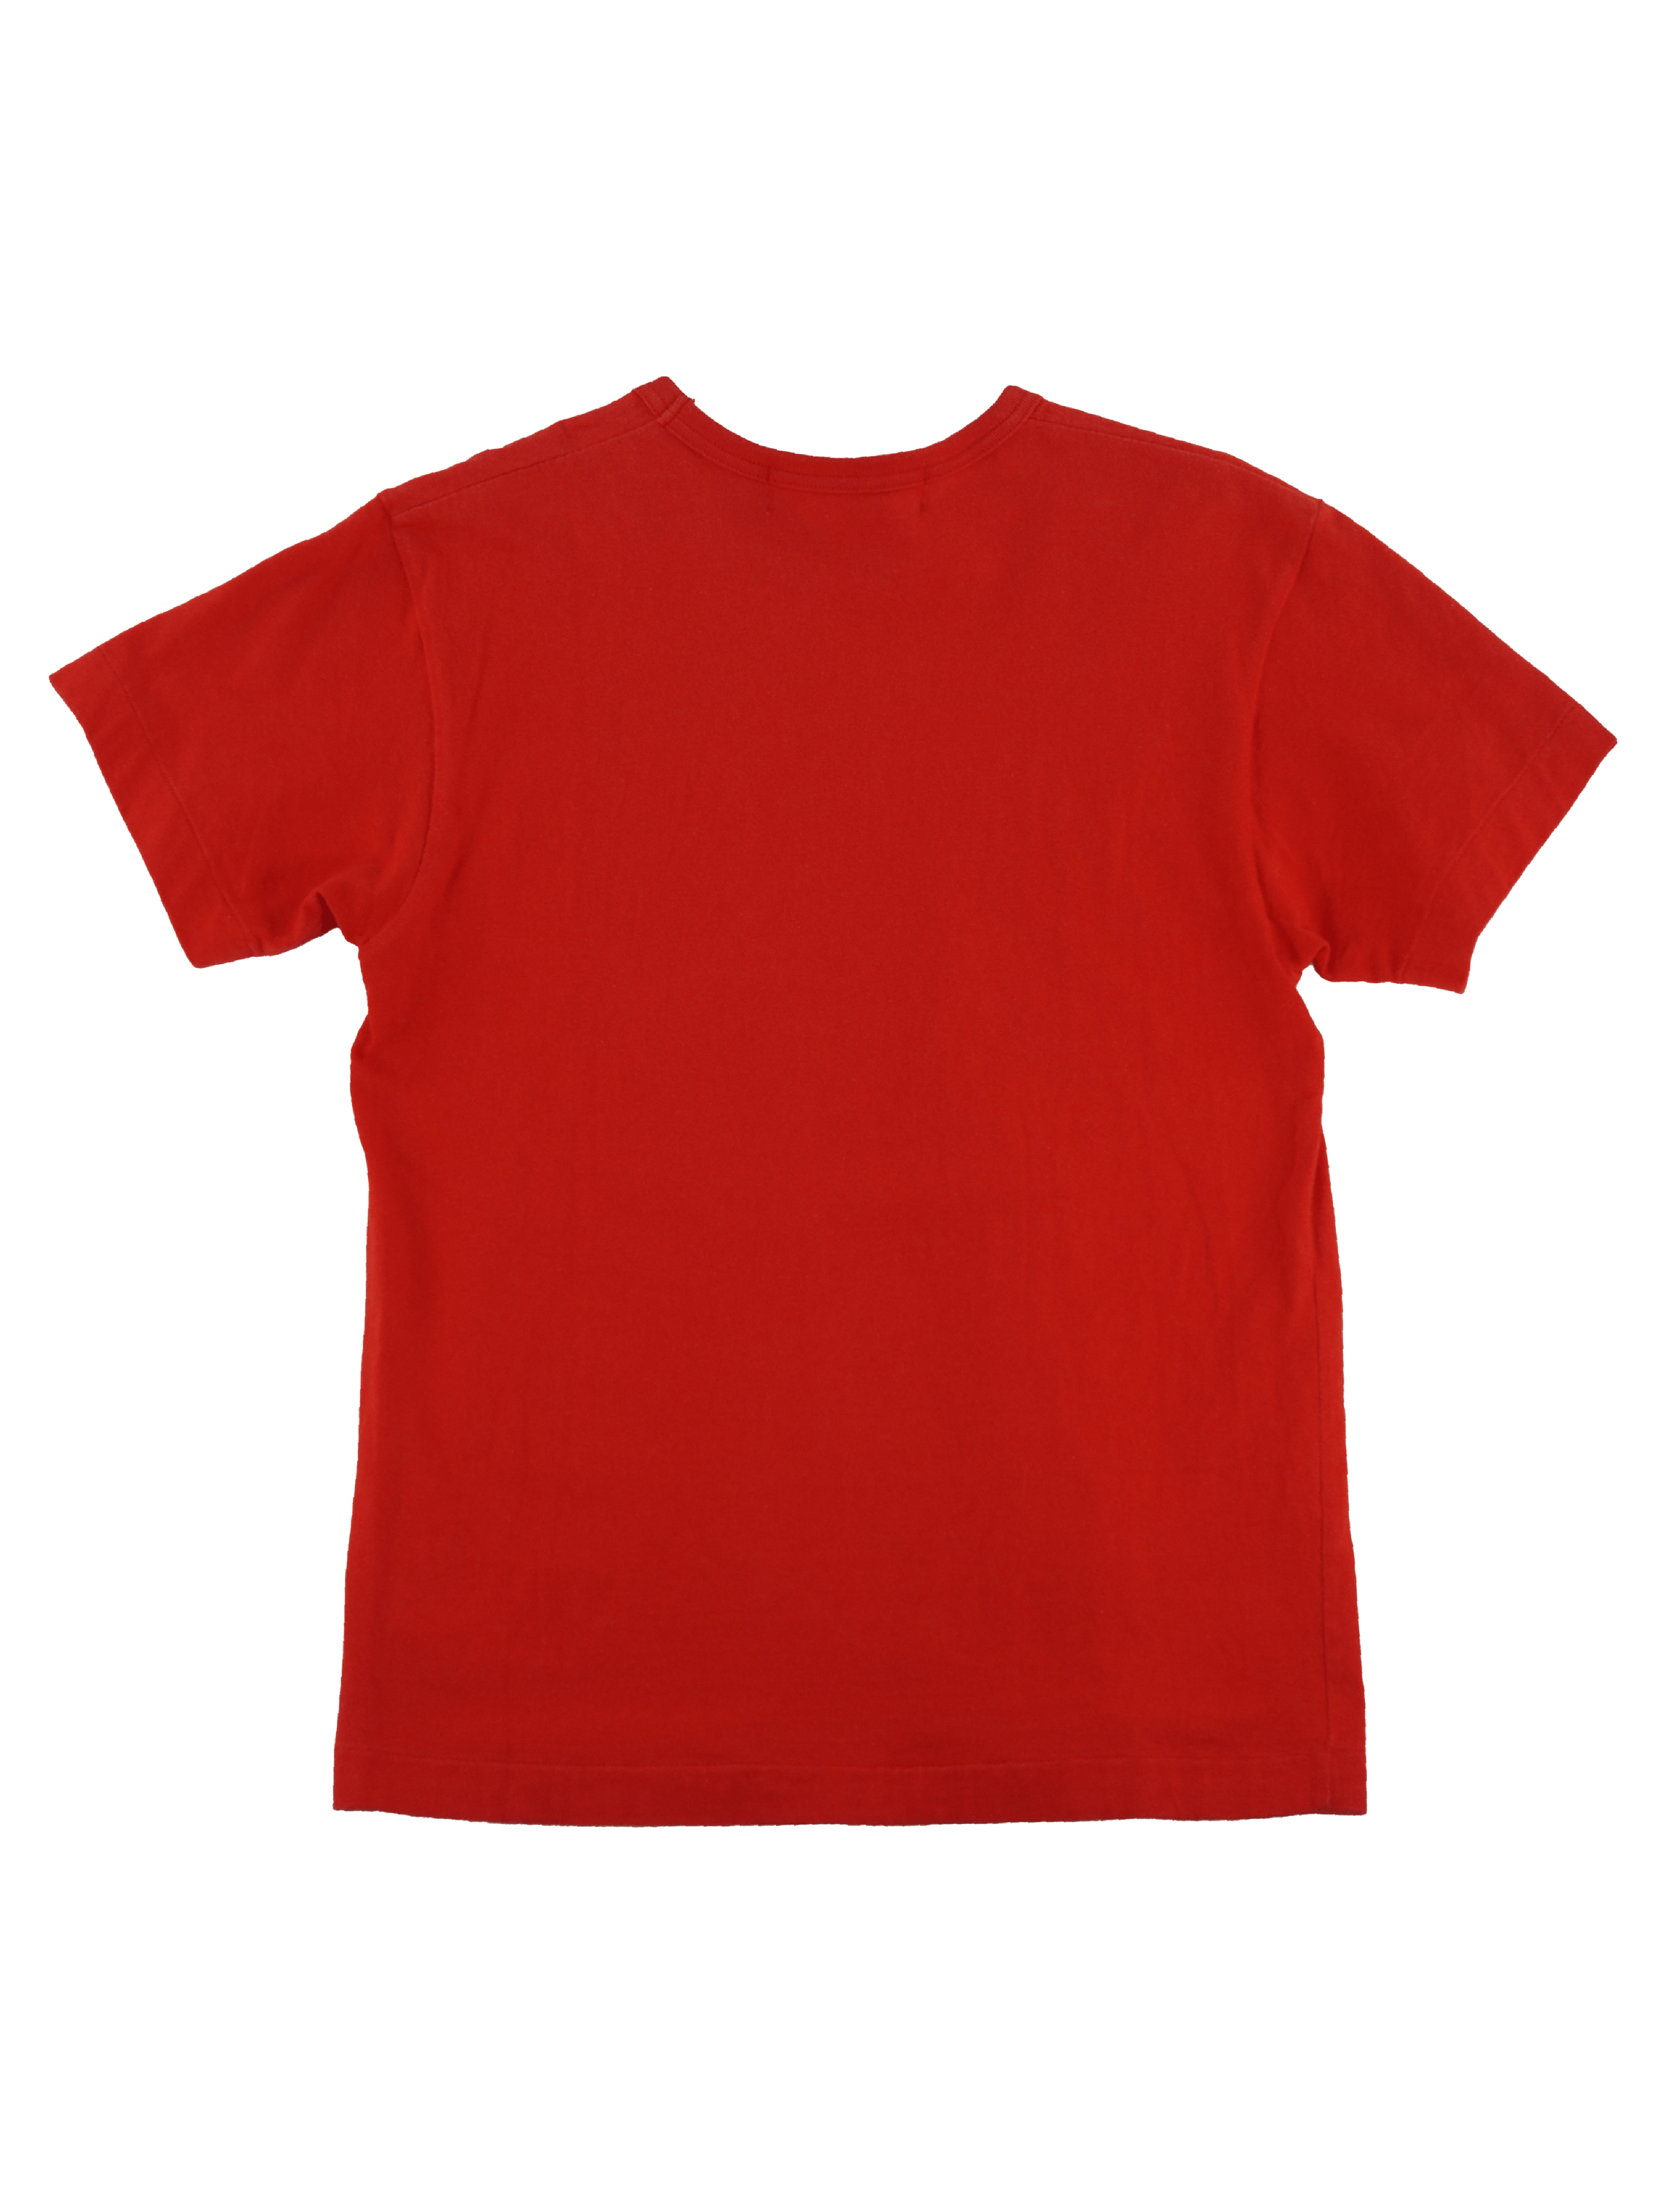 Comme des Garcons ❤️ CDG PLAY Double Heart Tee Red Size US M / EU 48-50 / 2 - 5 Thumbnail